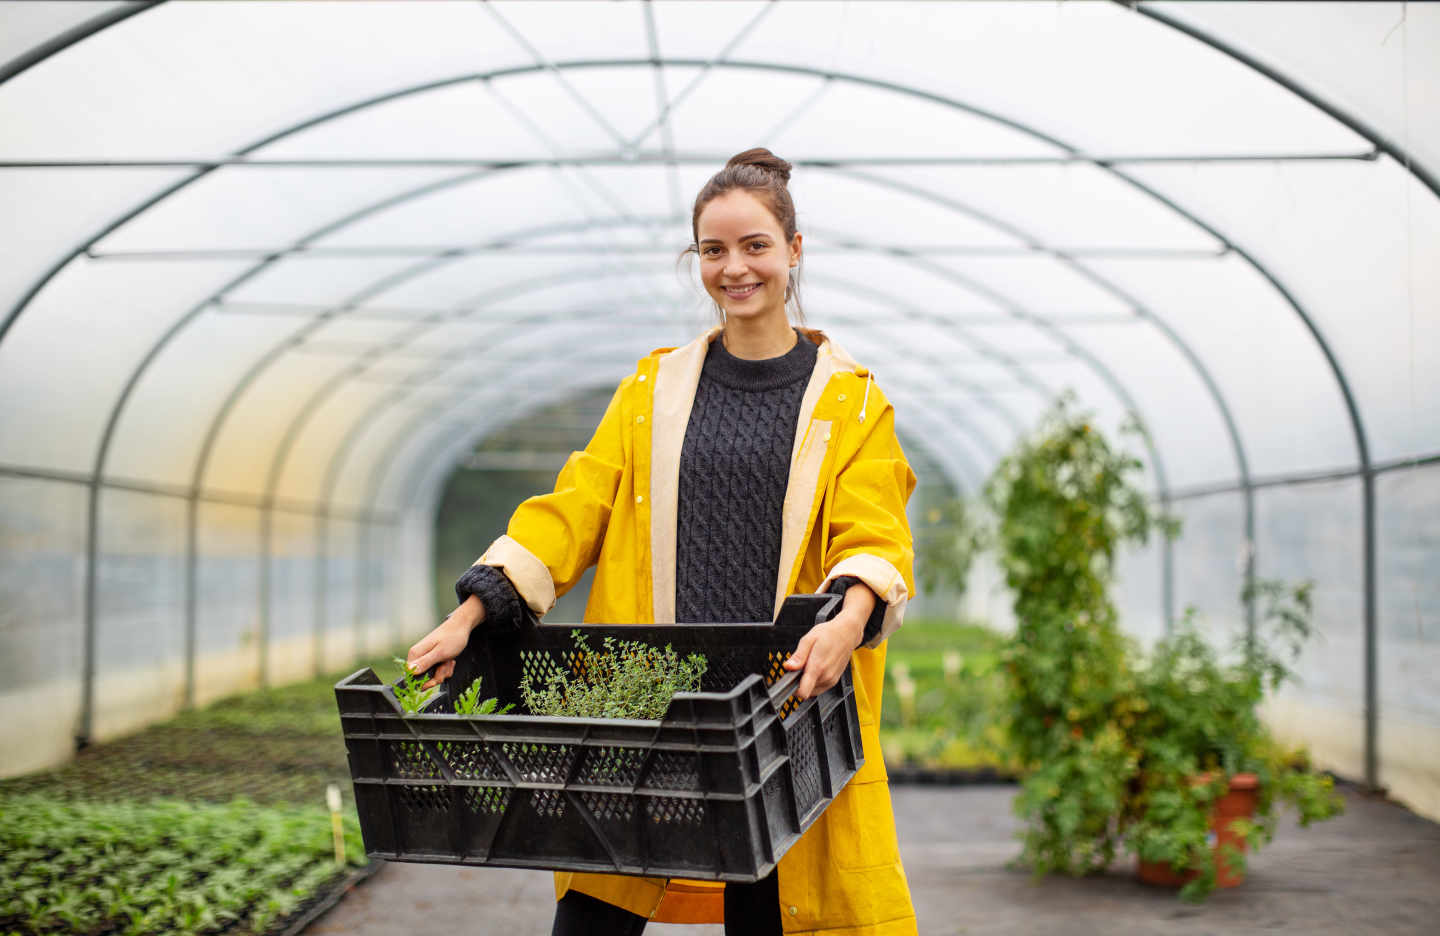 Shot of happy young woman with crate full of plants standing in greenhouse.